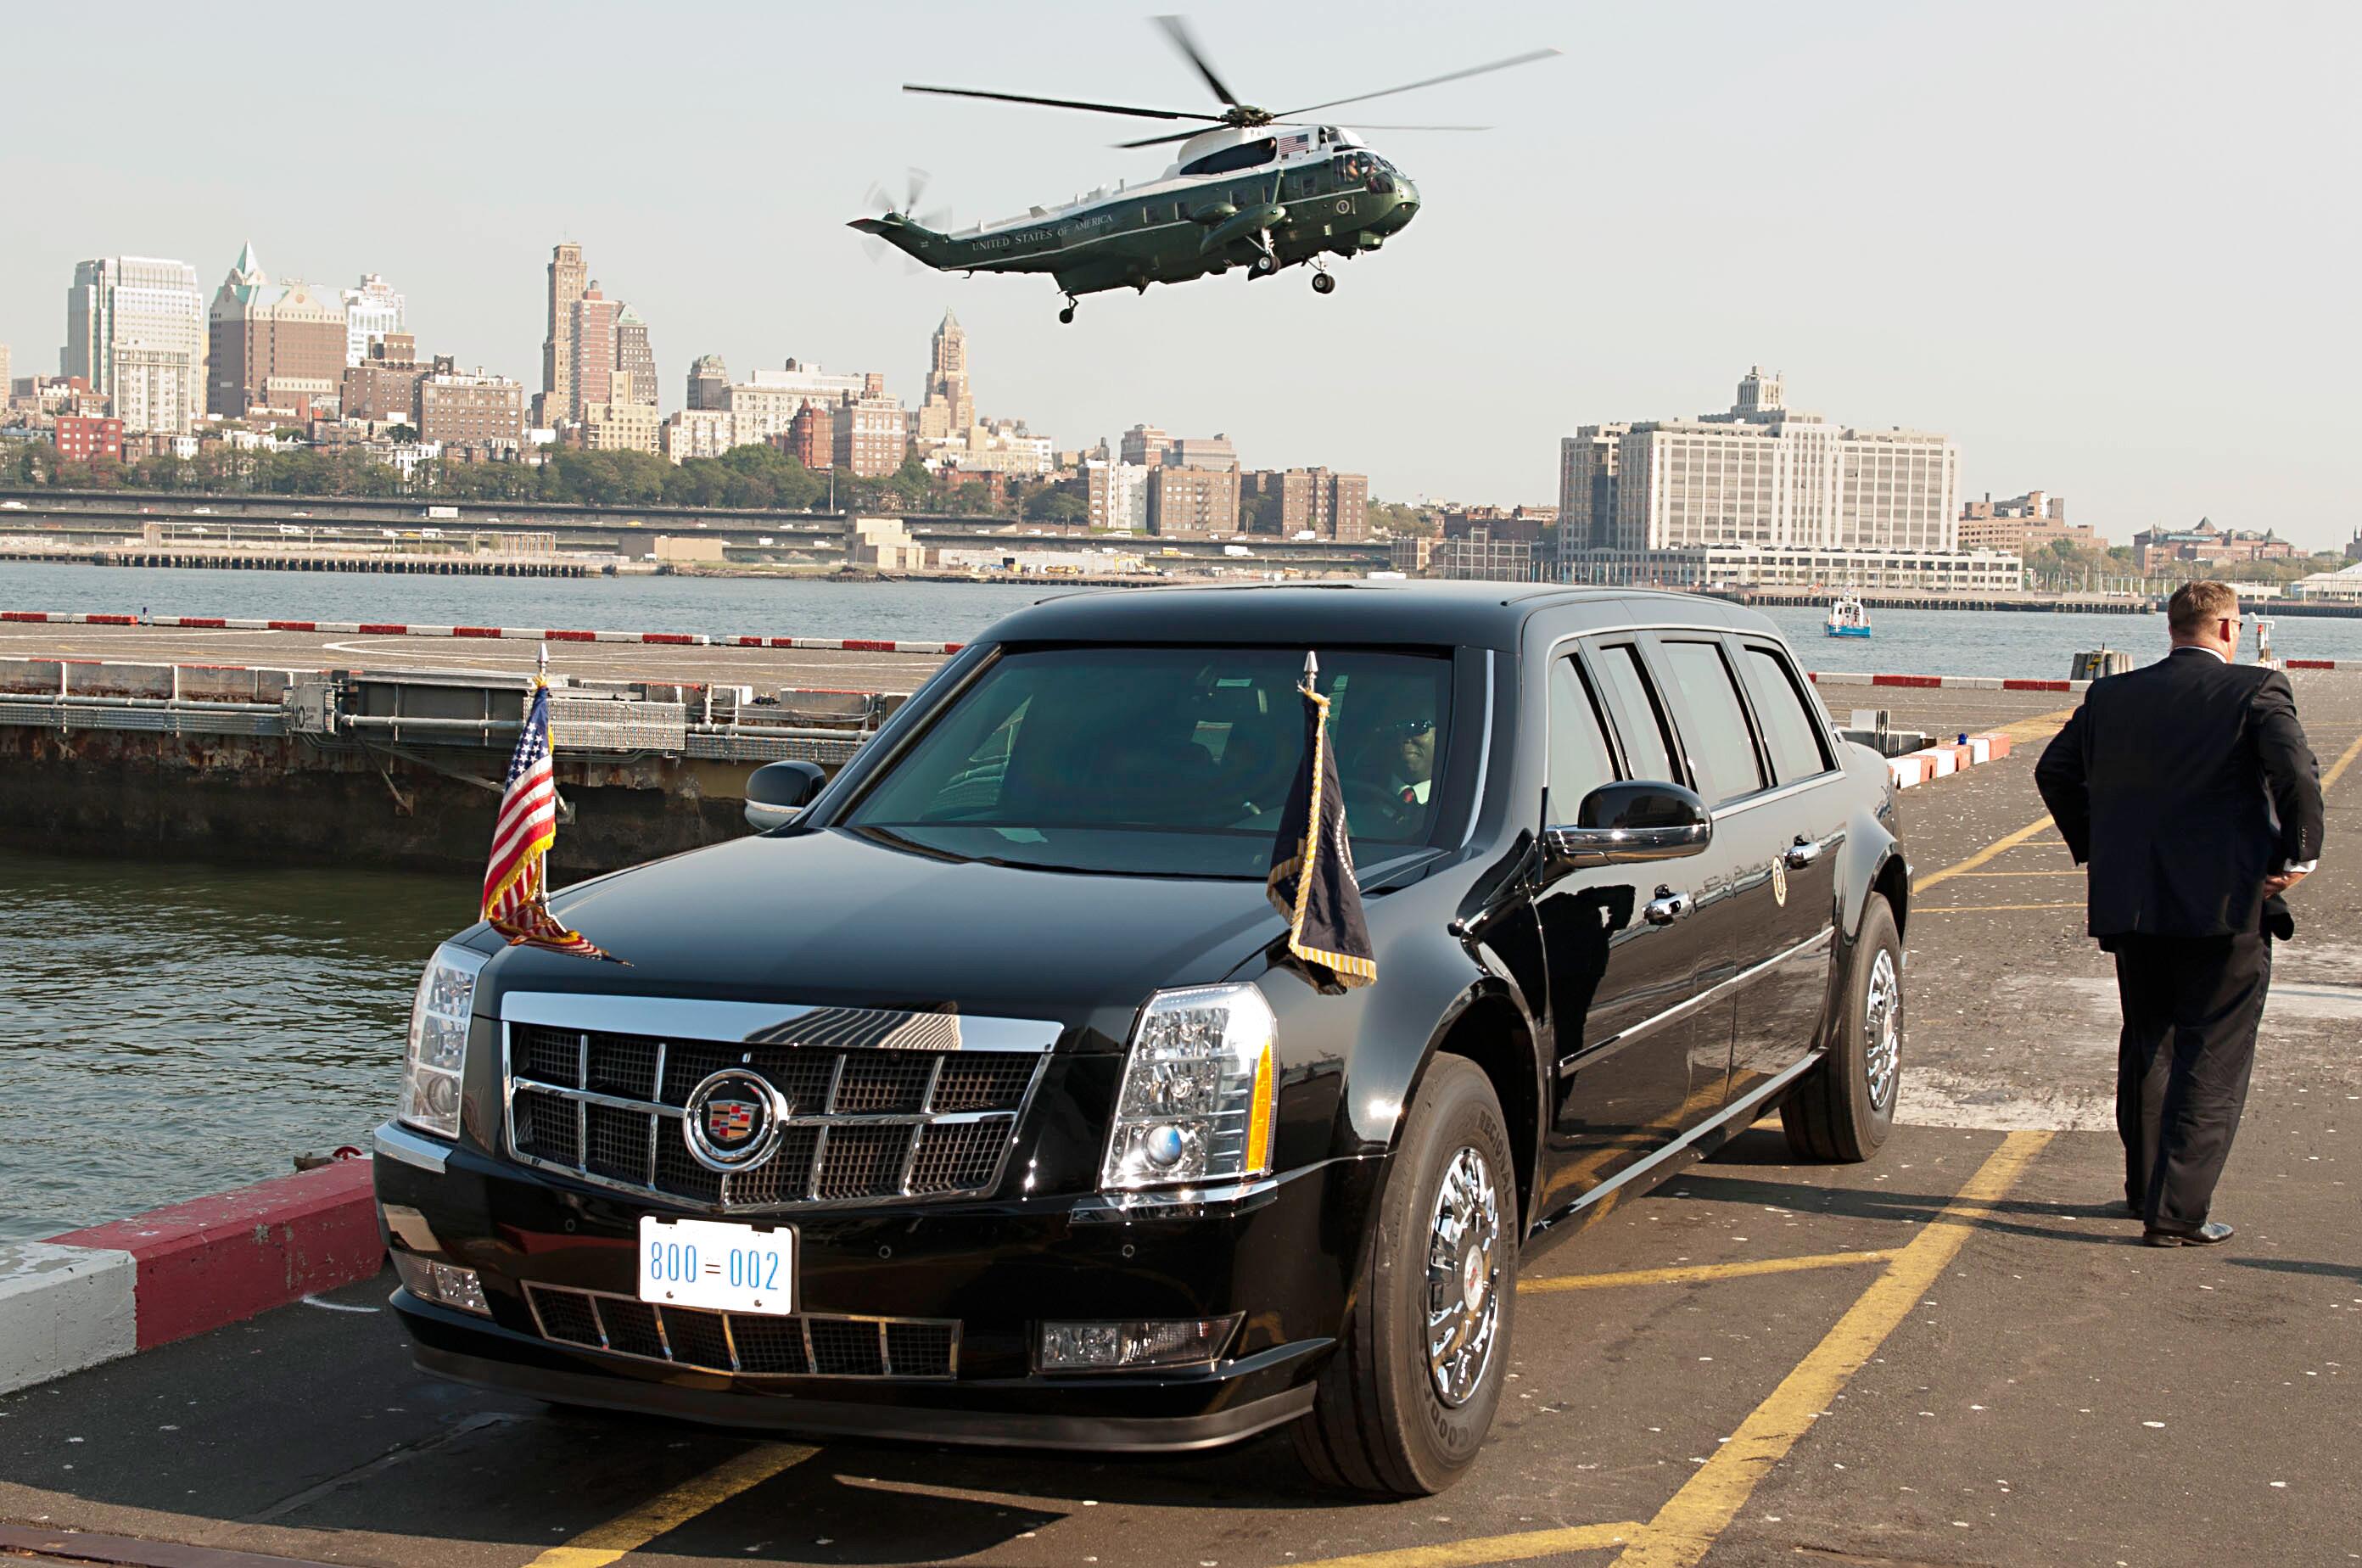 President Barack Obama travels in a 2009 customized DTS Cadillac that was in production for two years prior to being unveiled on Inauguration Day. Slightly more upright than its predecessor, the vehicle features 19.5 inch wheels and enough room for five seated passengers. The interior is ornate, complete with a fold-out desk for the President. The limousine is designed to Secret Service specifications, which includes a heavy duty chassis, extended length and armored material, and offers the President secure communications with encrypted measures./> <em>Credit: U.S. Secret Service</em>